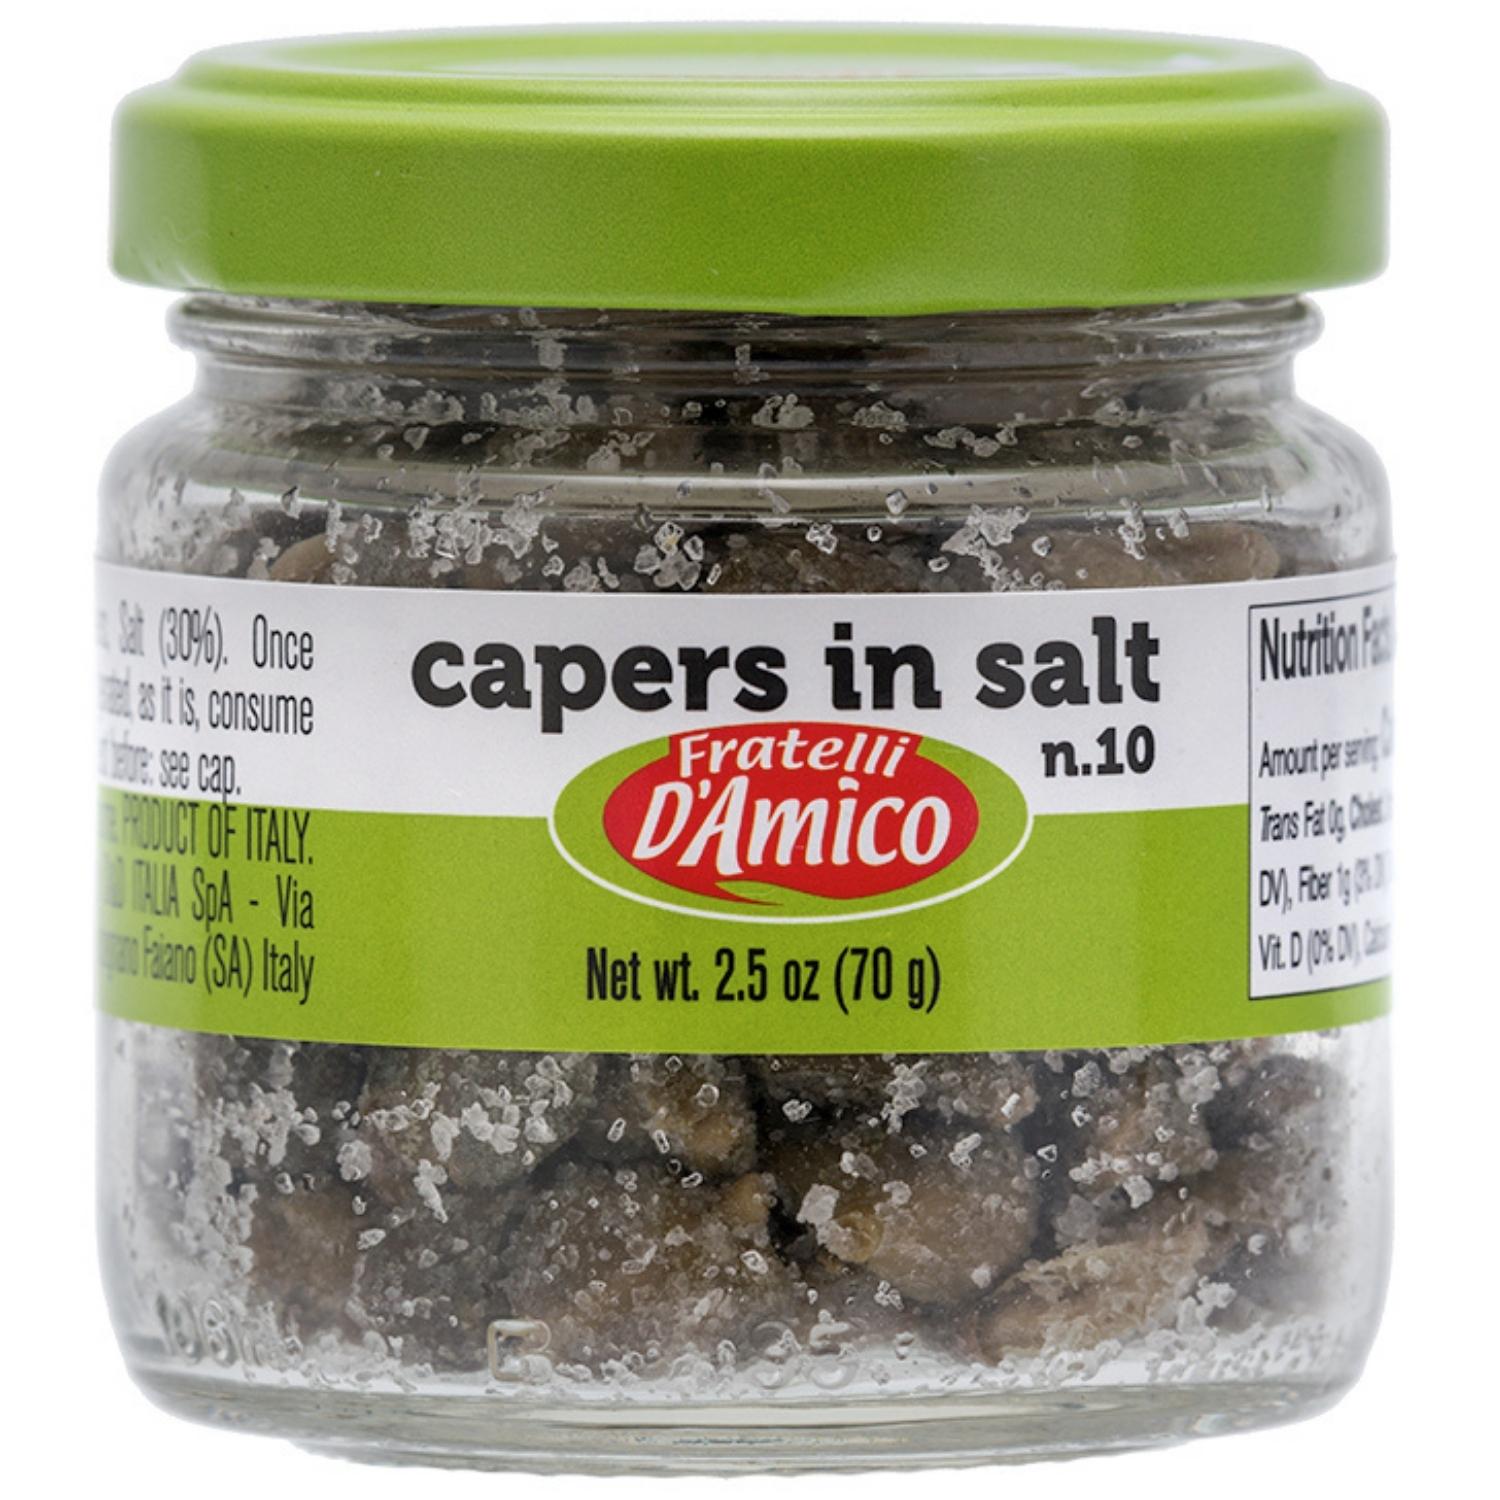 Fratelli D'Amico, Capers in Salt, Caperi Sotto Sale, Salted, no, #10, Non Pareil, 2.5oz (70g), Product of Italy.